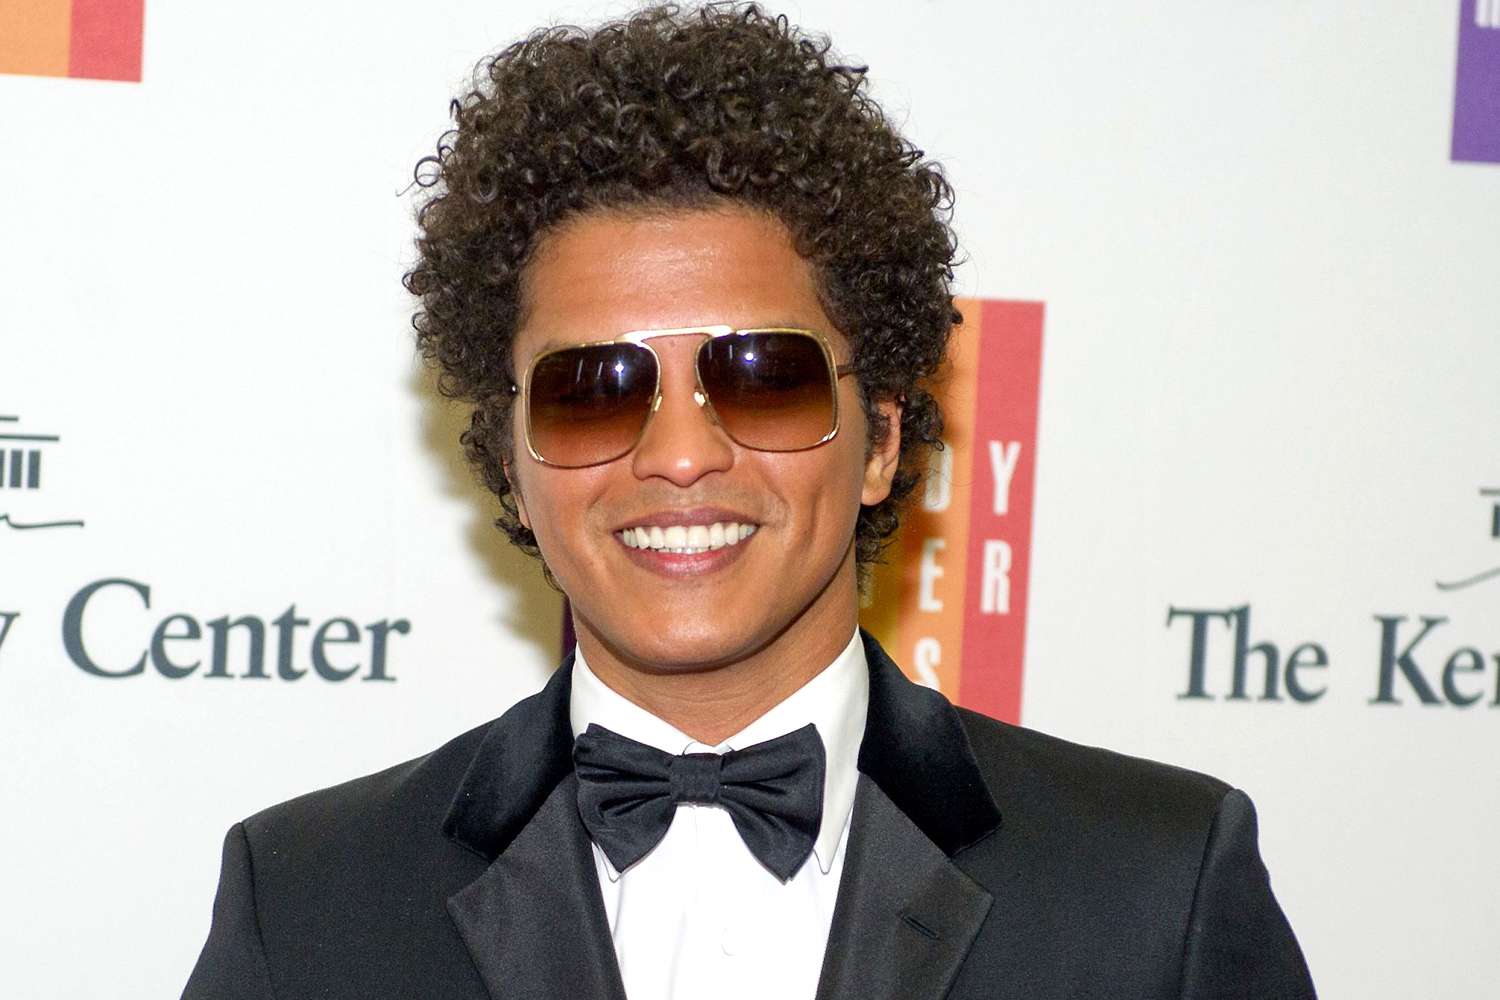 What Musicians Can Learn From Bruno Mars